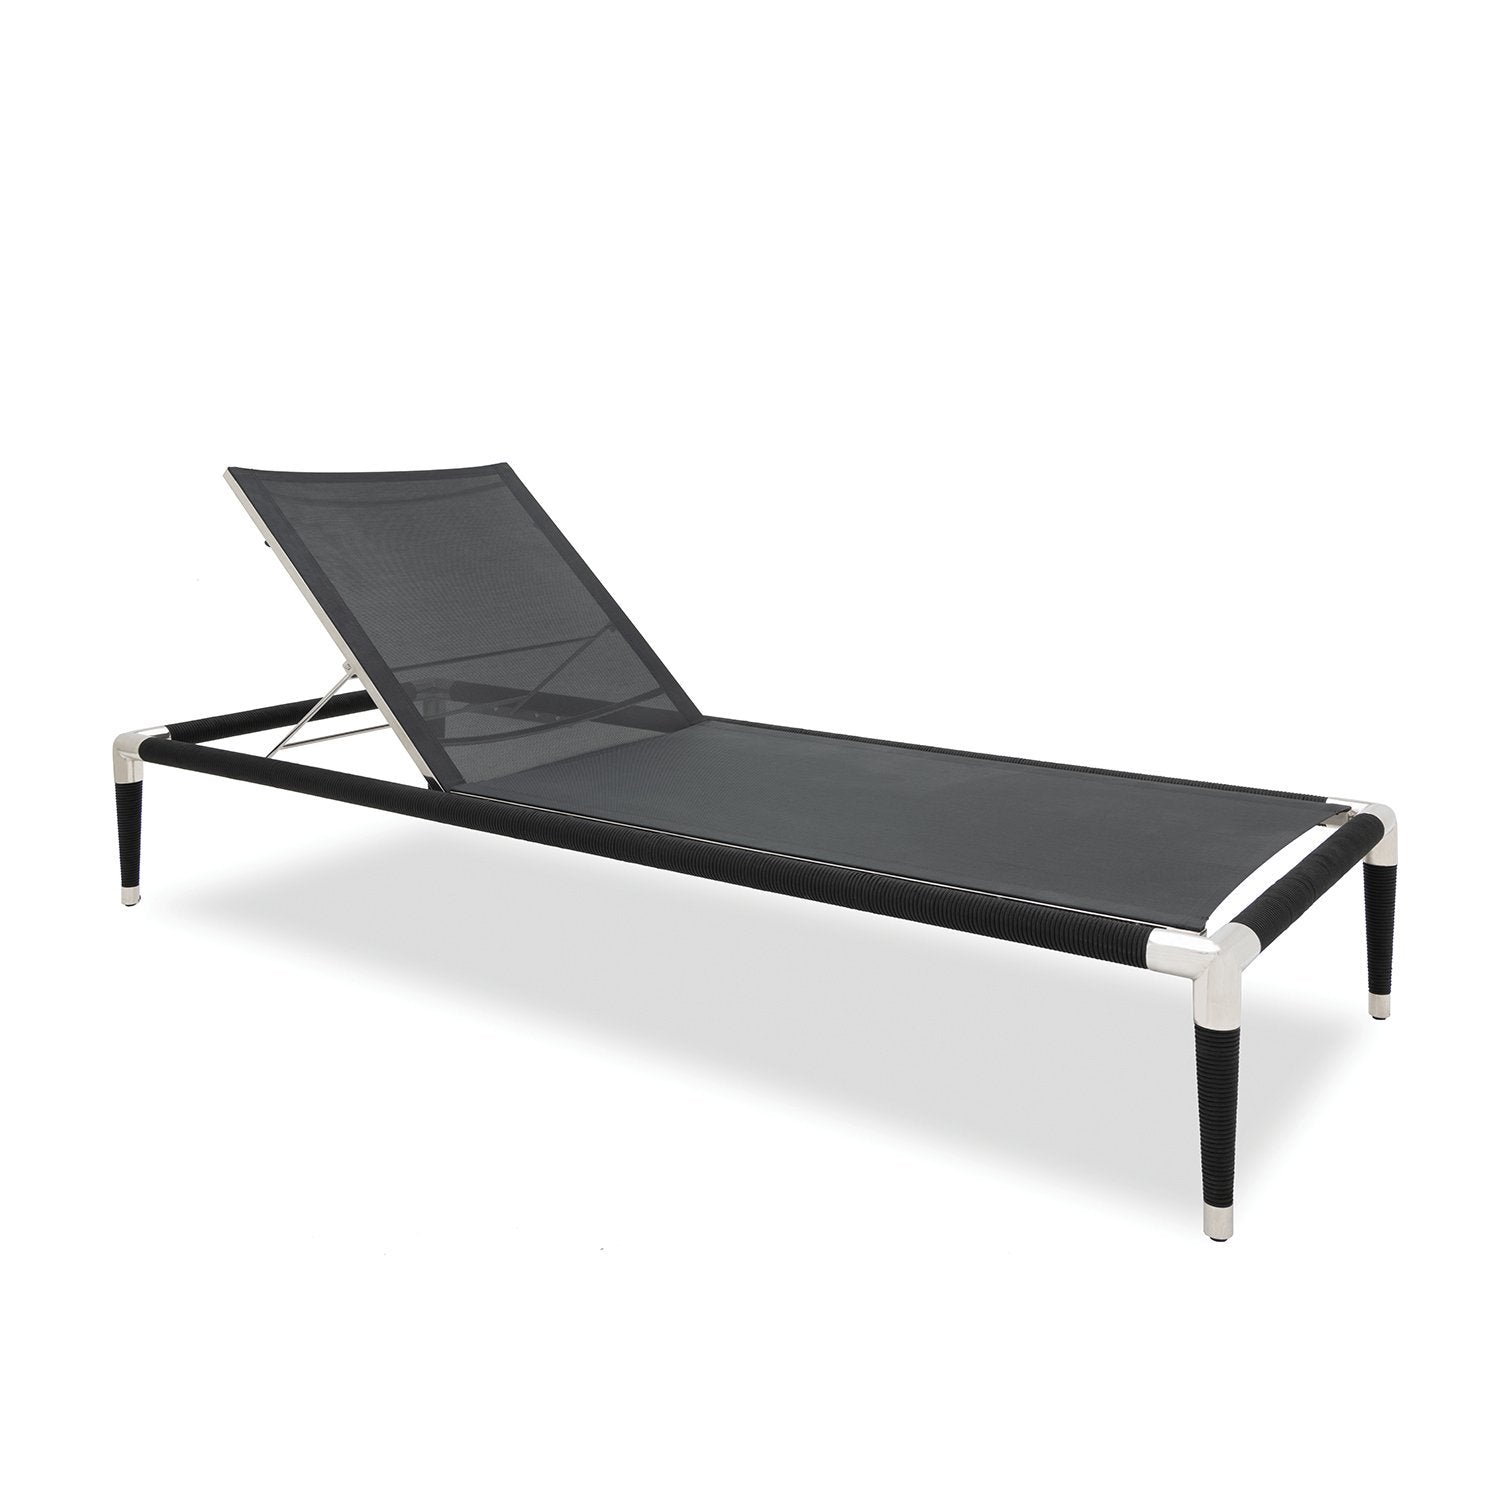 Marina sun lounger with black rope accents